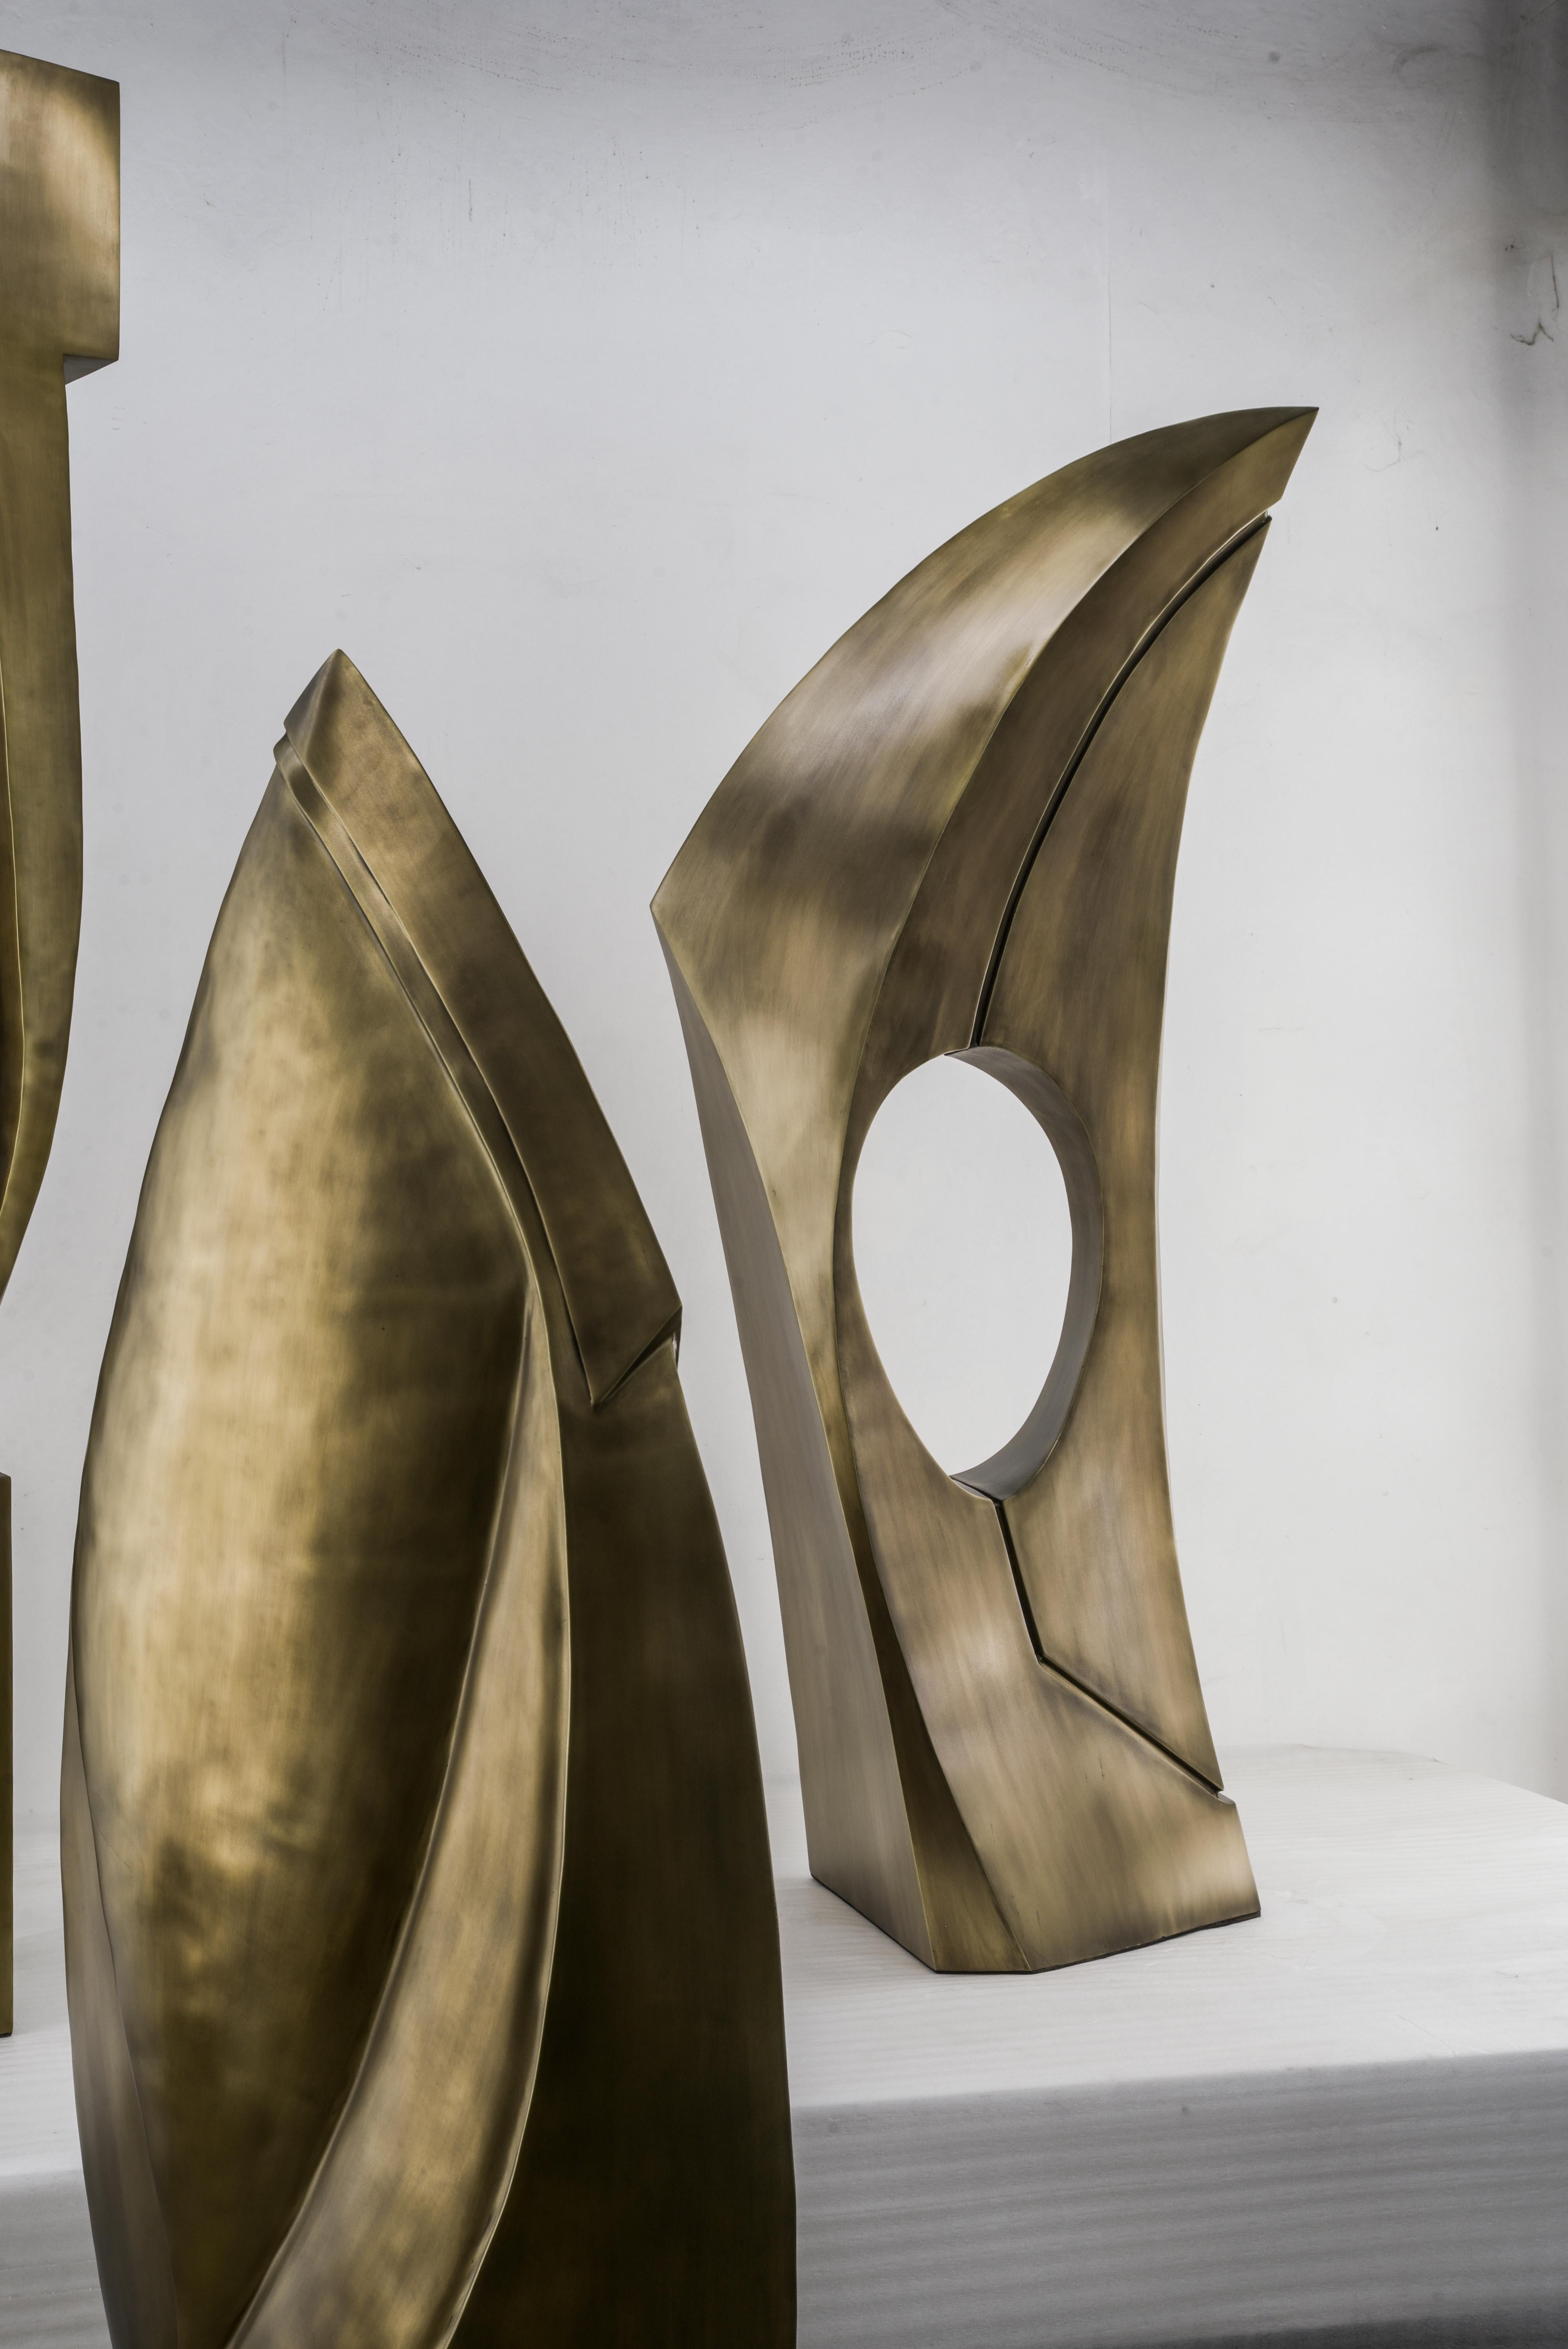 Patrick Coard Paris expands on his unique and beautiful sculptural object collection. The Golden ratio is a powerful piece evoking the essence of strength, perfection and beauty. The piece is entirely handcrafted in bronze-patina brass. See images